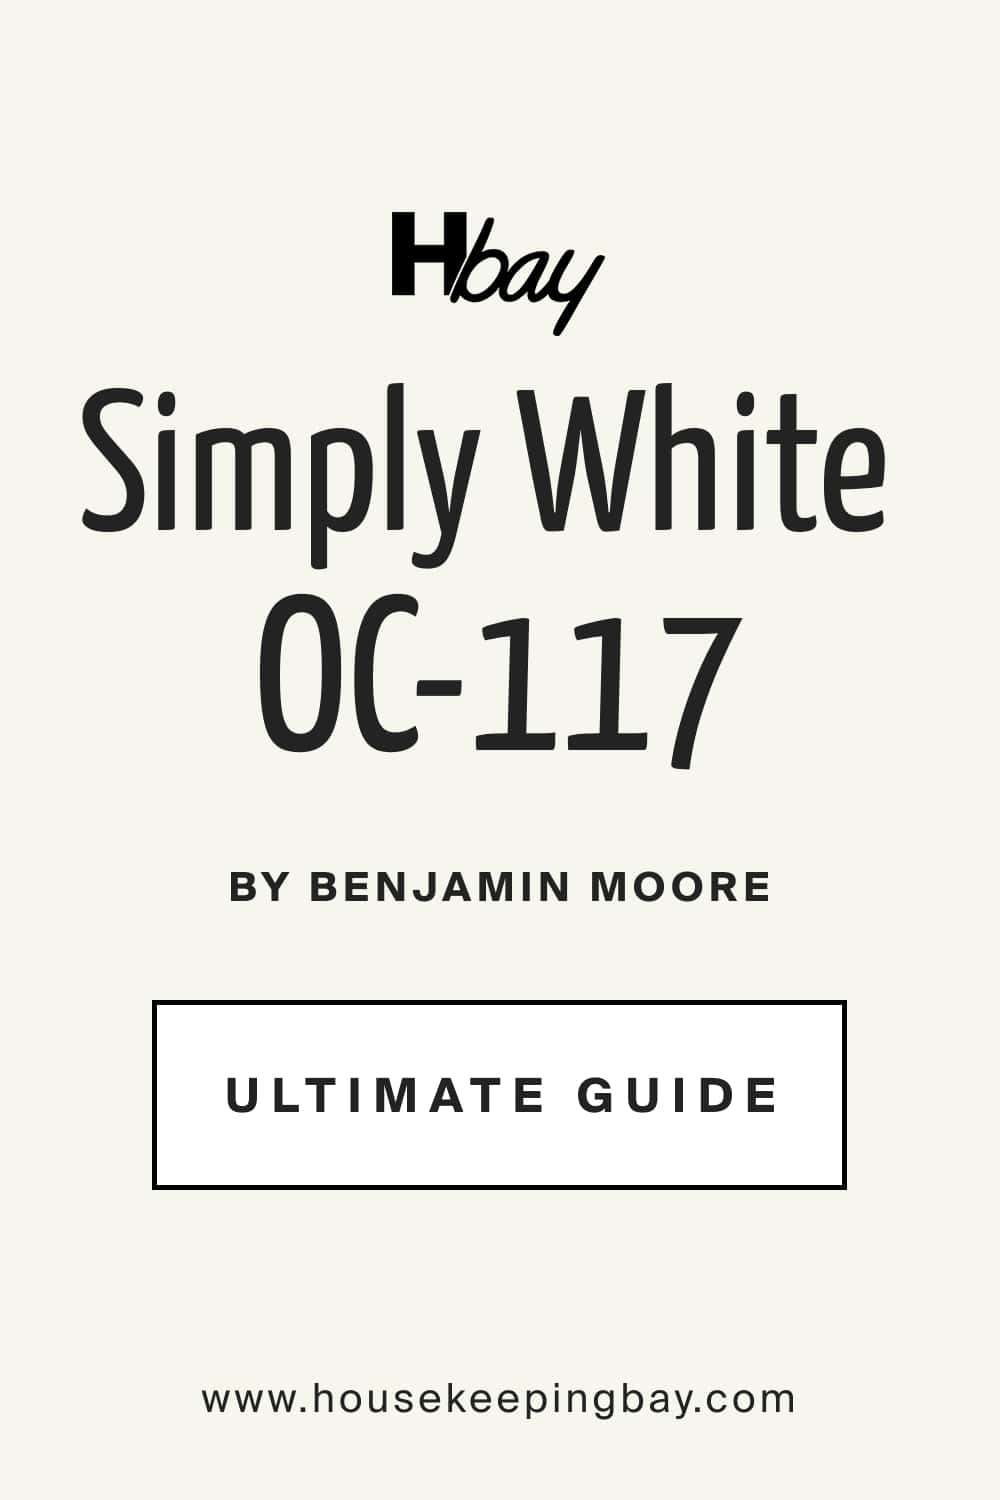 Simply White OC 117 by Benjamin Moore Ultimate Guide